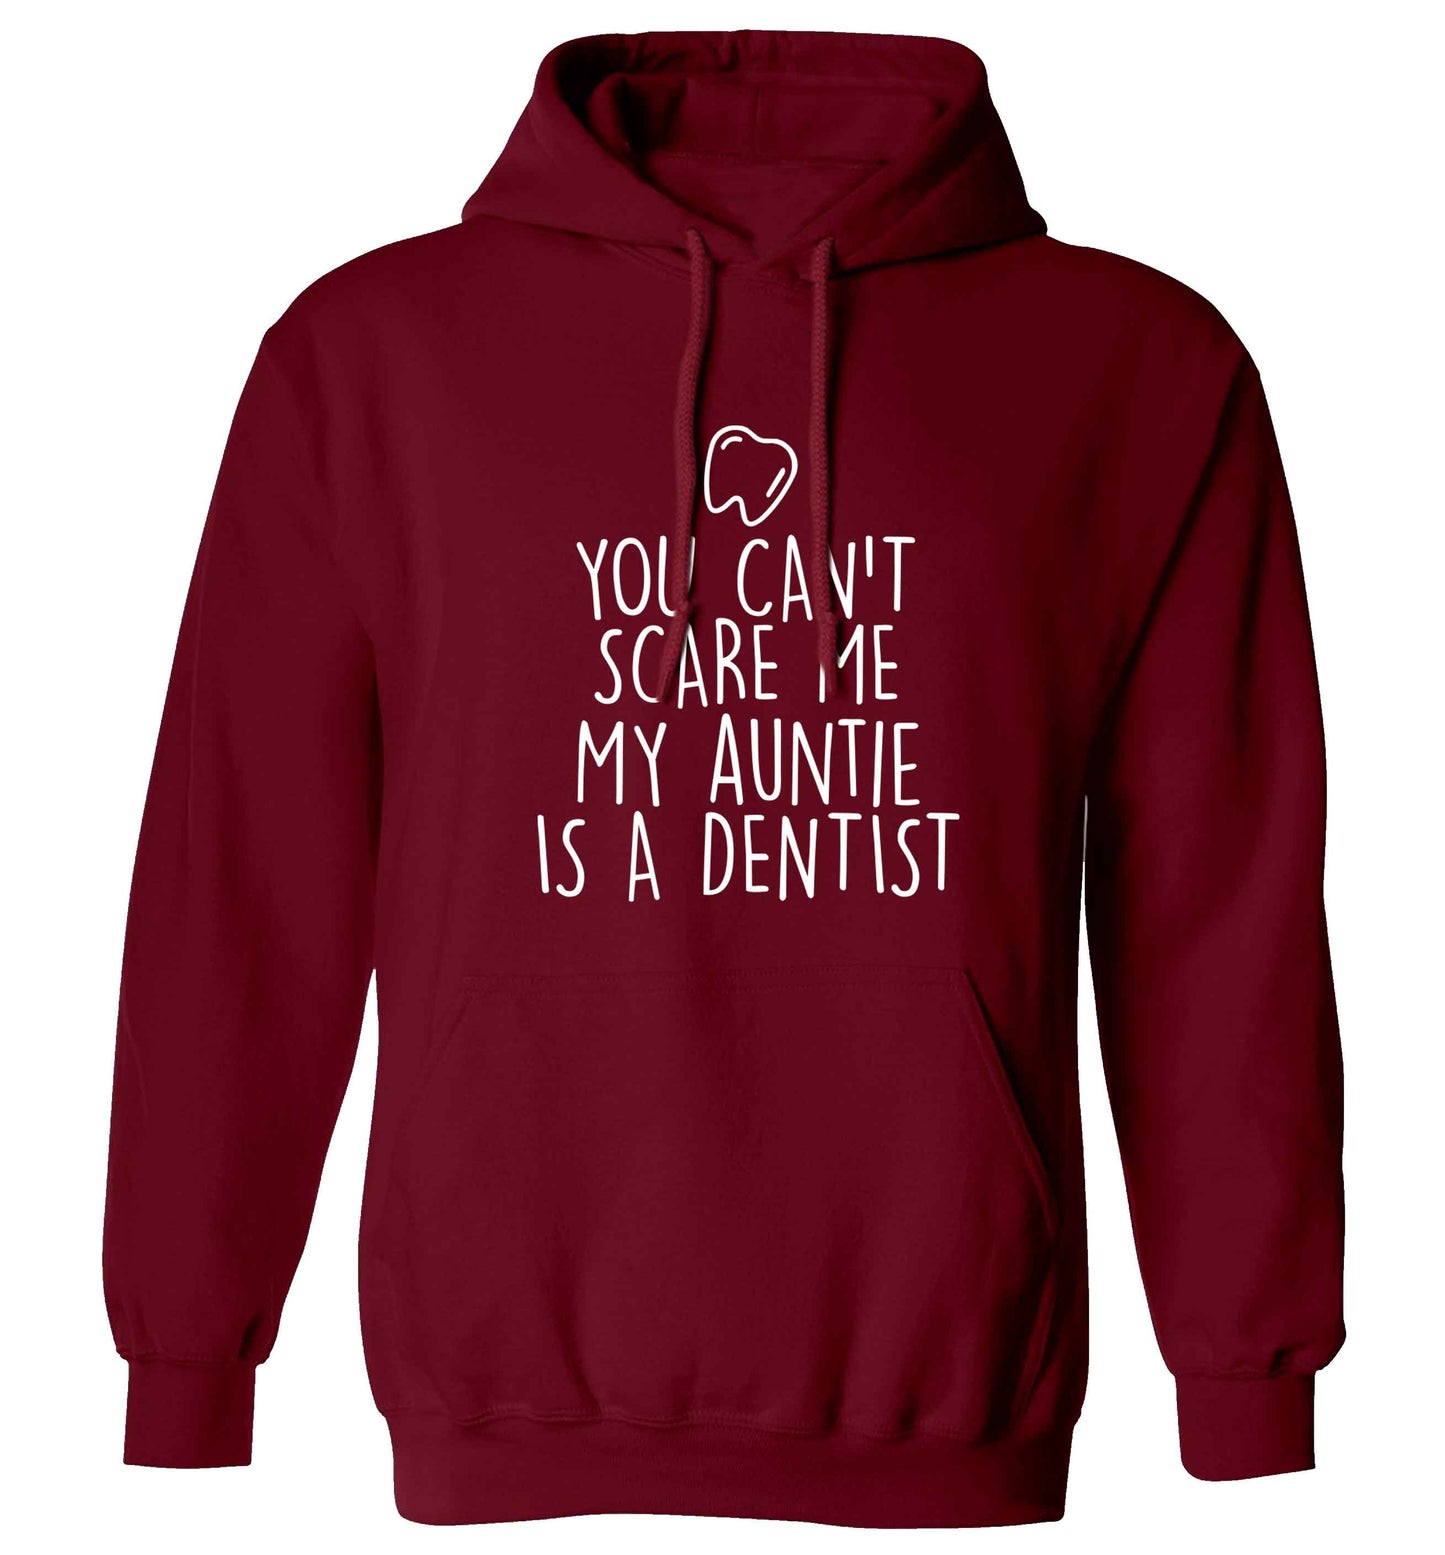 You can't scare me my auntie is a dentist adults unisex maroon hoodie 2XL